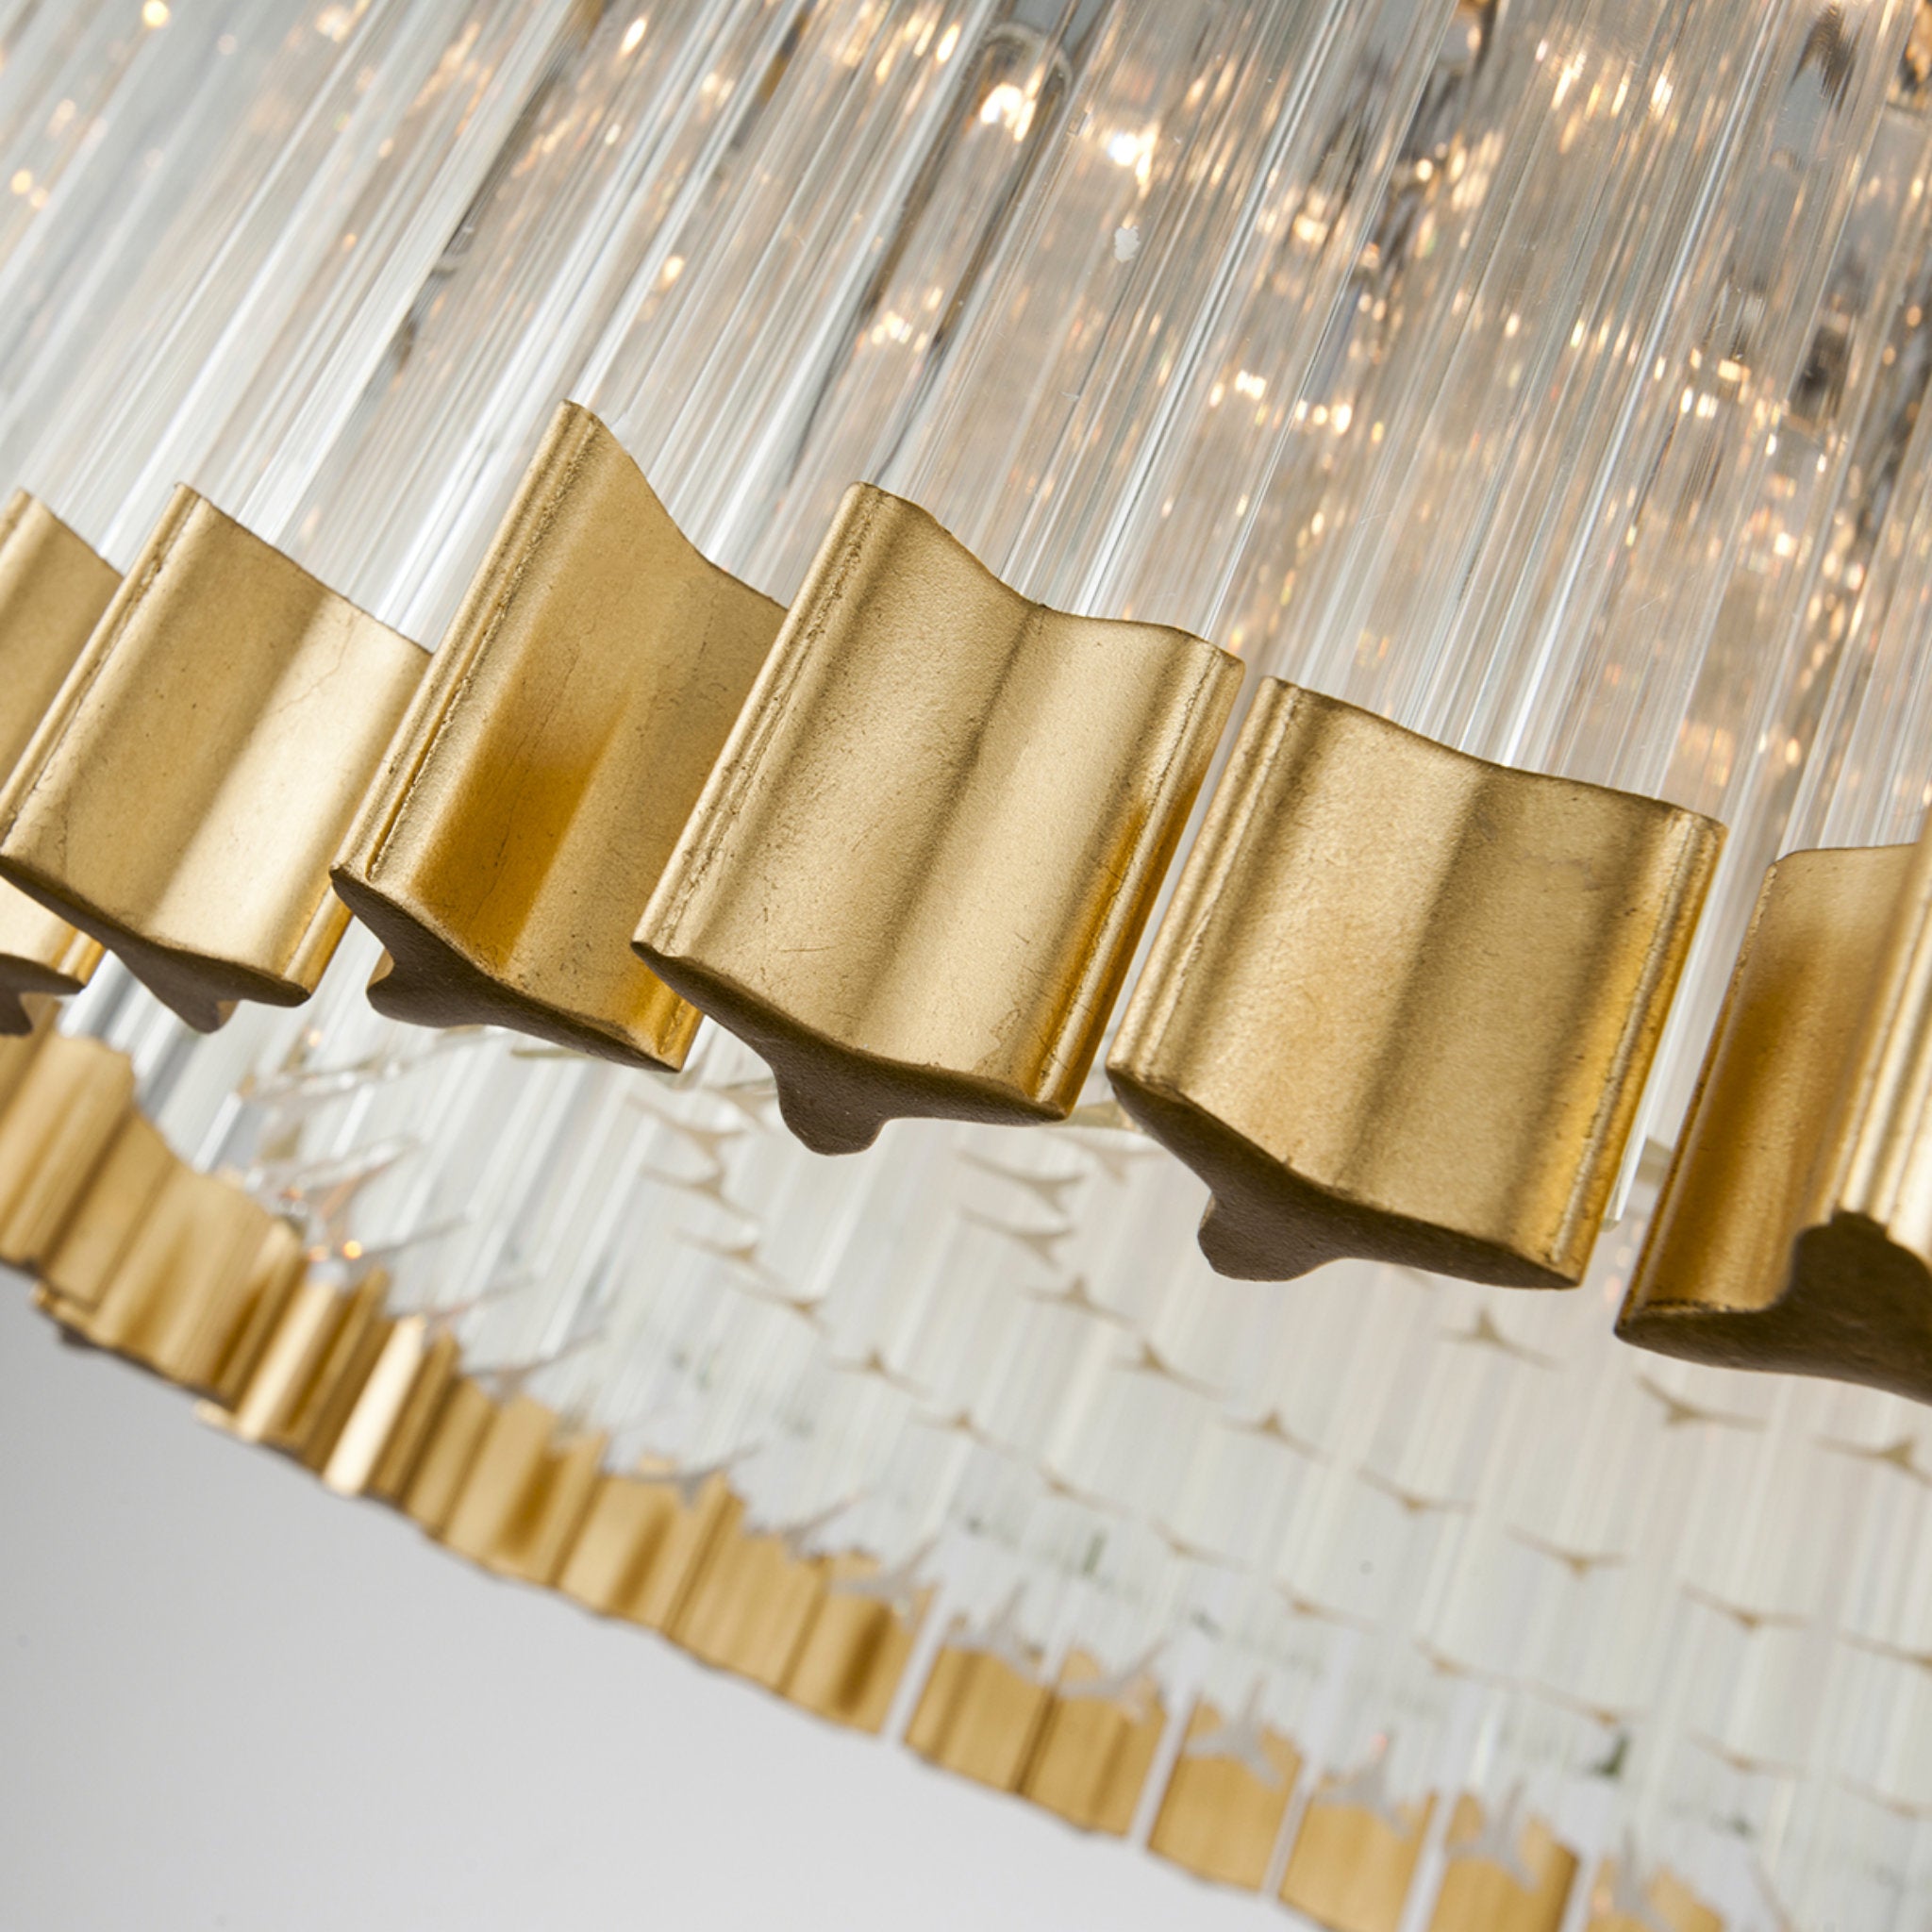 Charisma 10 Light Chandelier in Gold Leaf W Polished Stainless